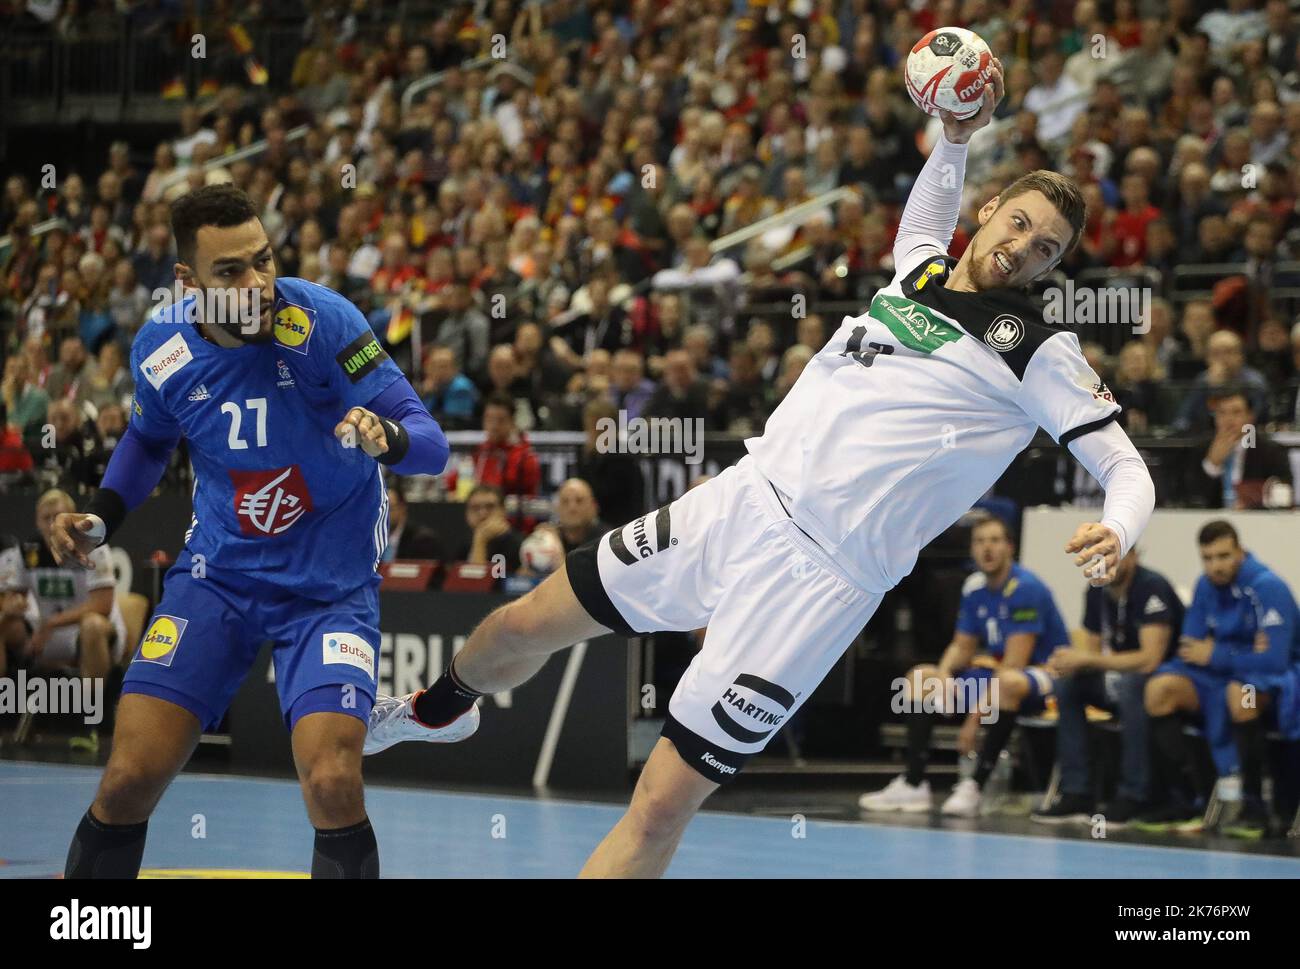 Hendrik Pekeler (Germany) and Adrien Dipanda (France) during the IHF Men's World Championship 2019, Group A handball match between Germany and France on January 15, 2019 at Mercedes-Benz Arena in Berlin, Germany  Stock Photo